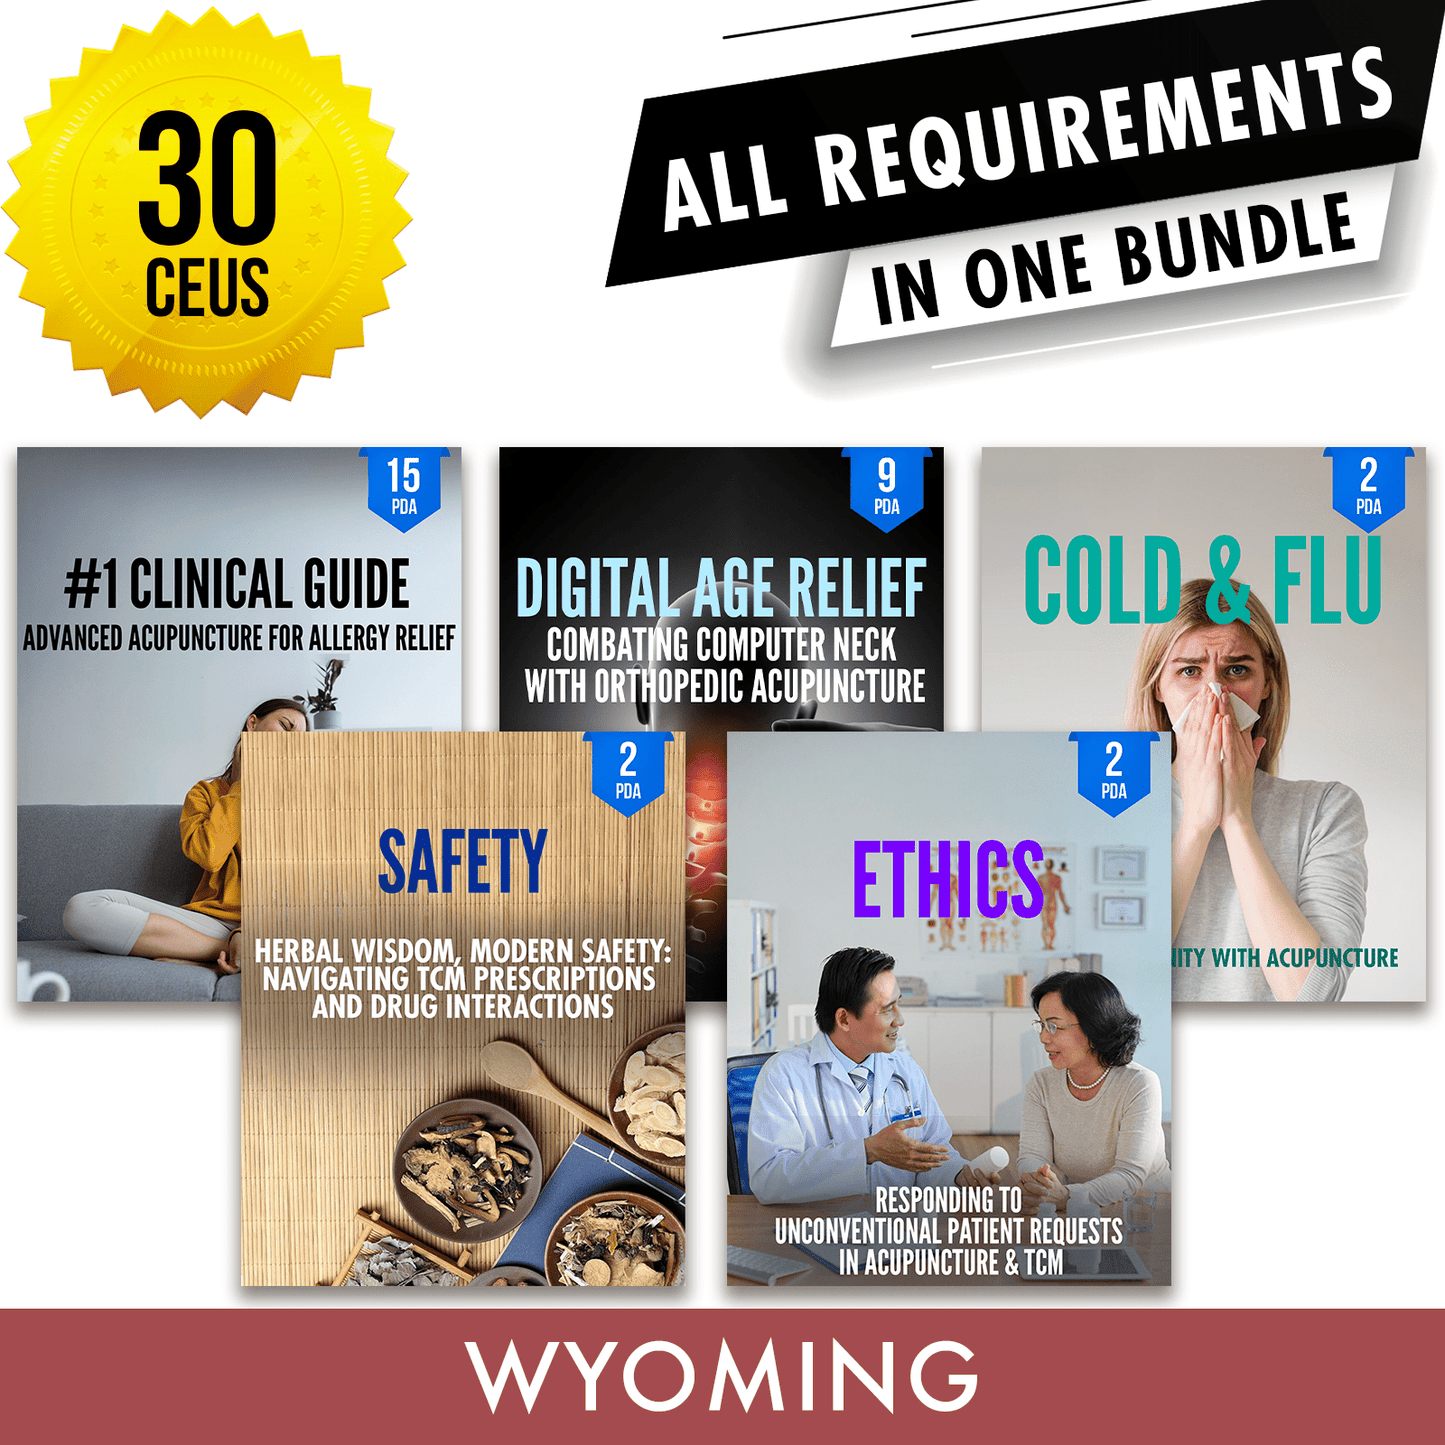 Wyoming Bundle 2: Full Recertification - All Required Acupuncture Continuing Education Credits in One Package, 30 PDA/CEU Hours ACEU Masters continuing education florida california nccaom australia uk canada